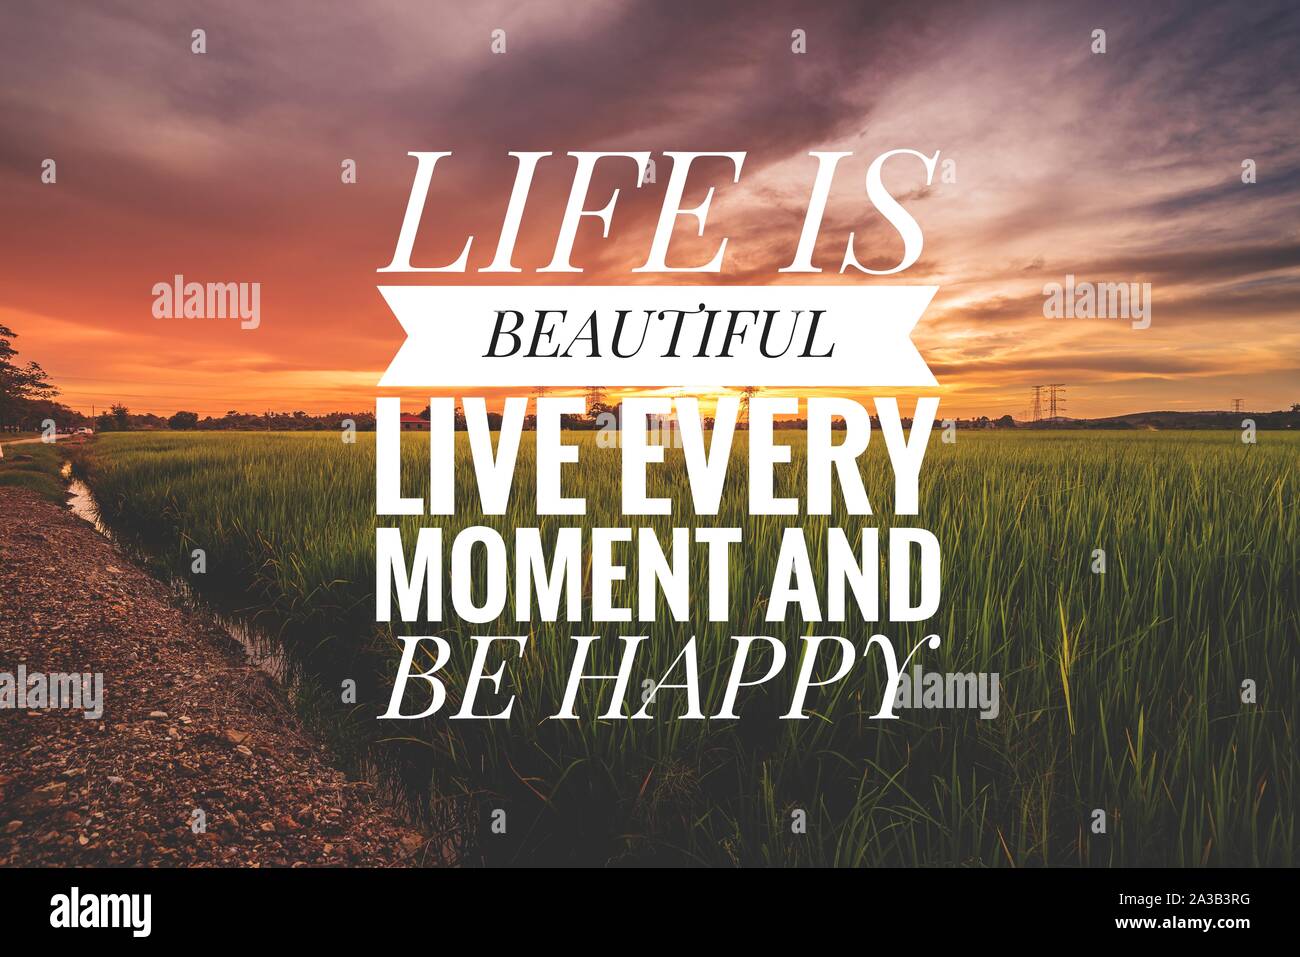 Collection of 999+ Mesmerizing 4K Images with Inspiring Quotes on Life